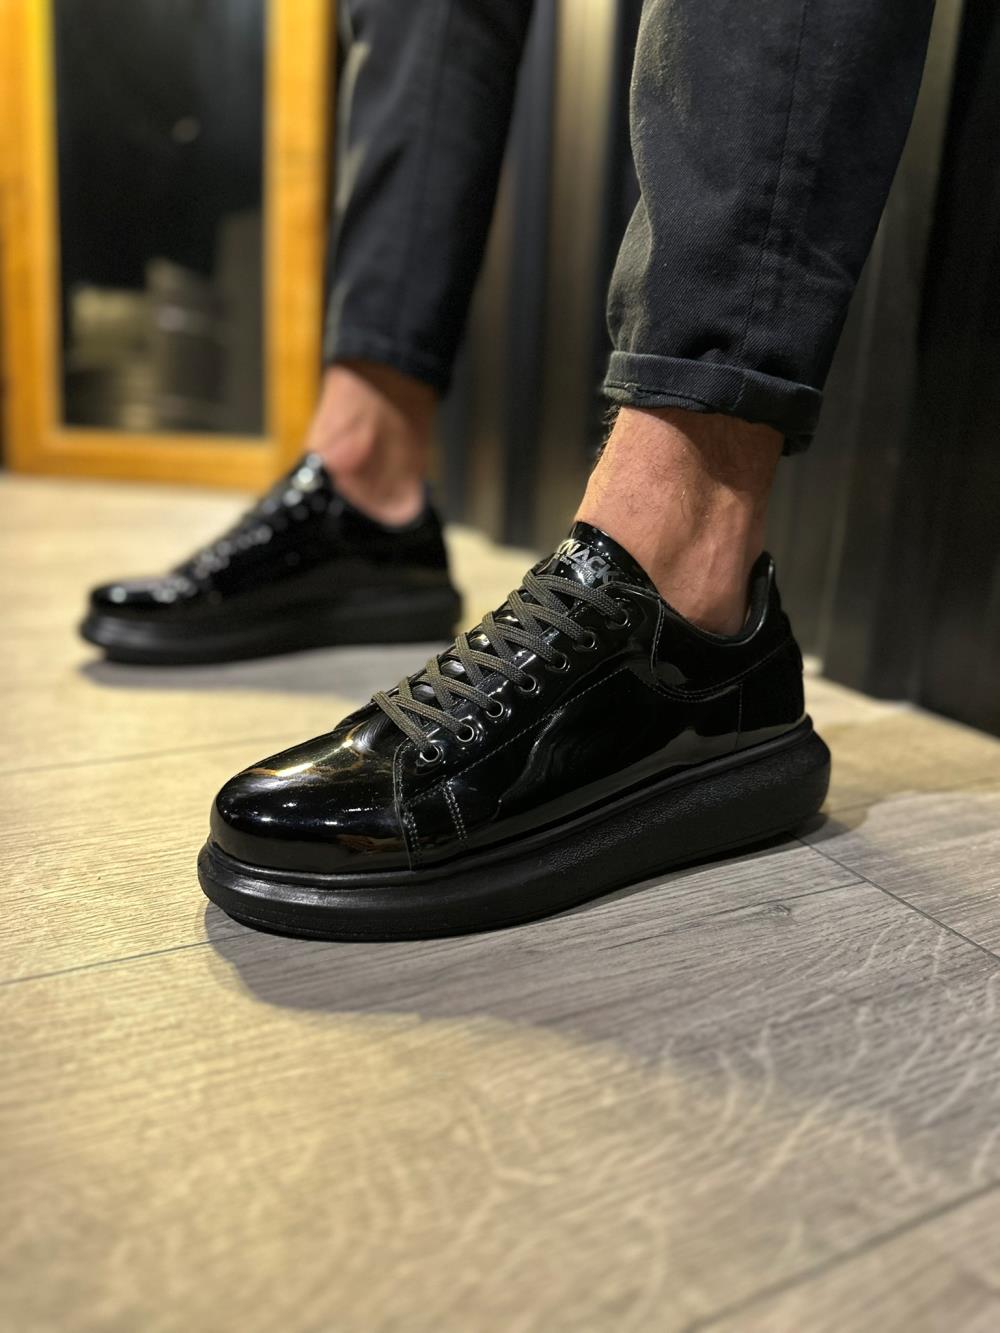 Men's High Sole Casual Shoes 044 Black Patent Leather (Black Sole) - STREETMODE ™